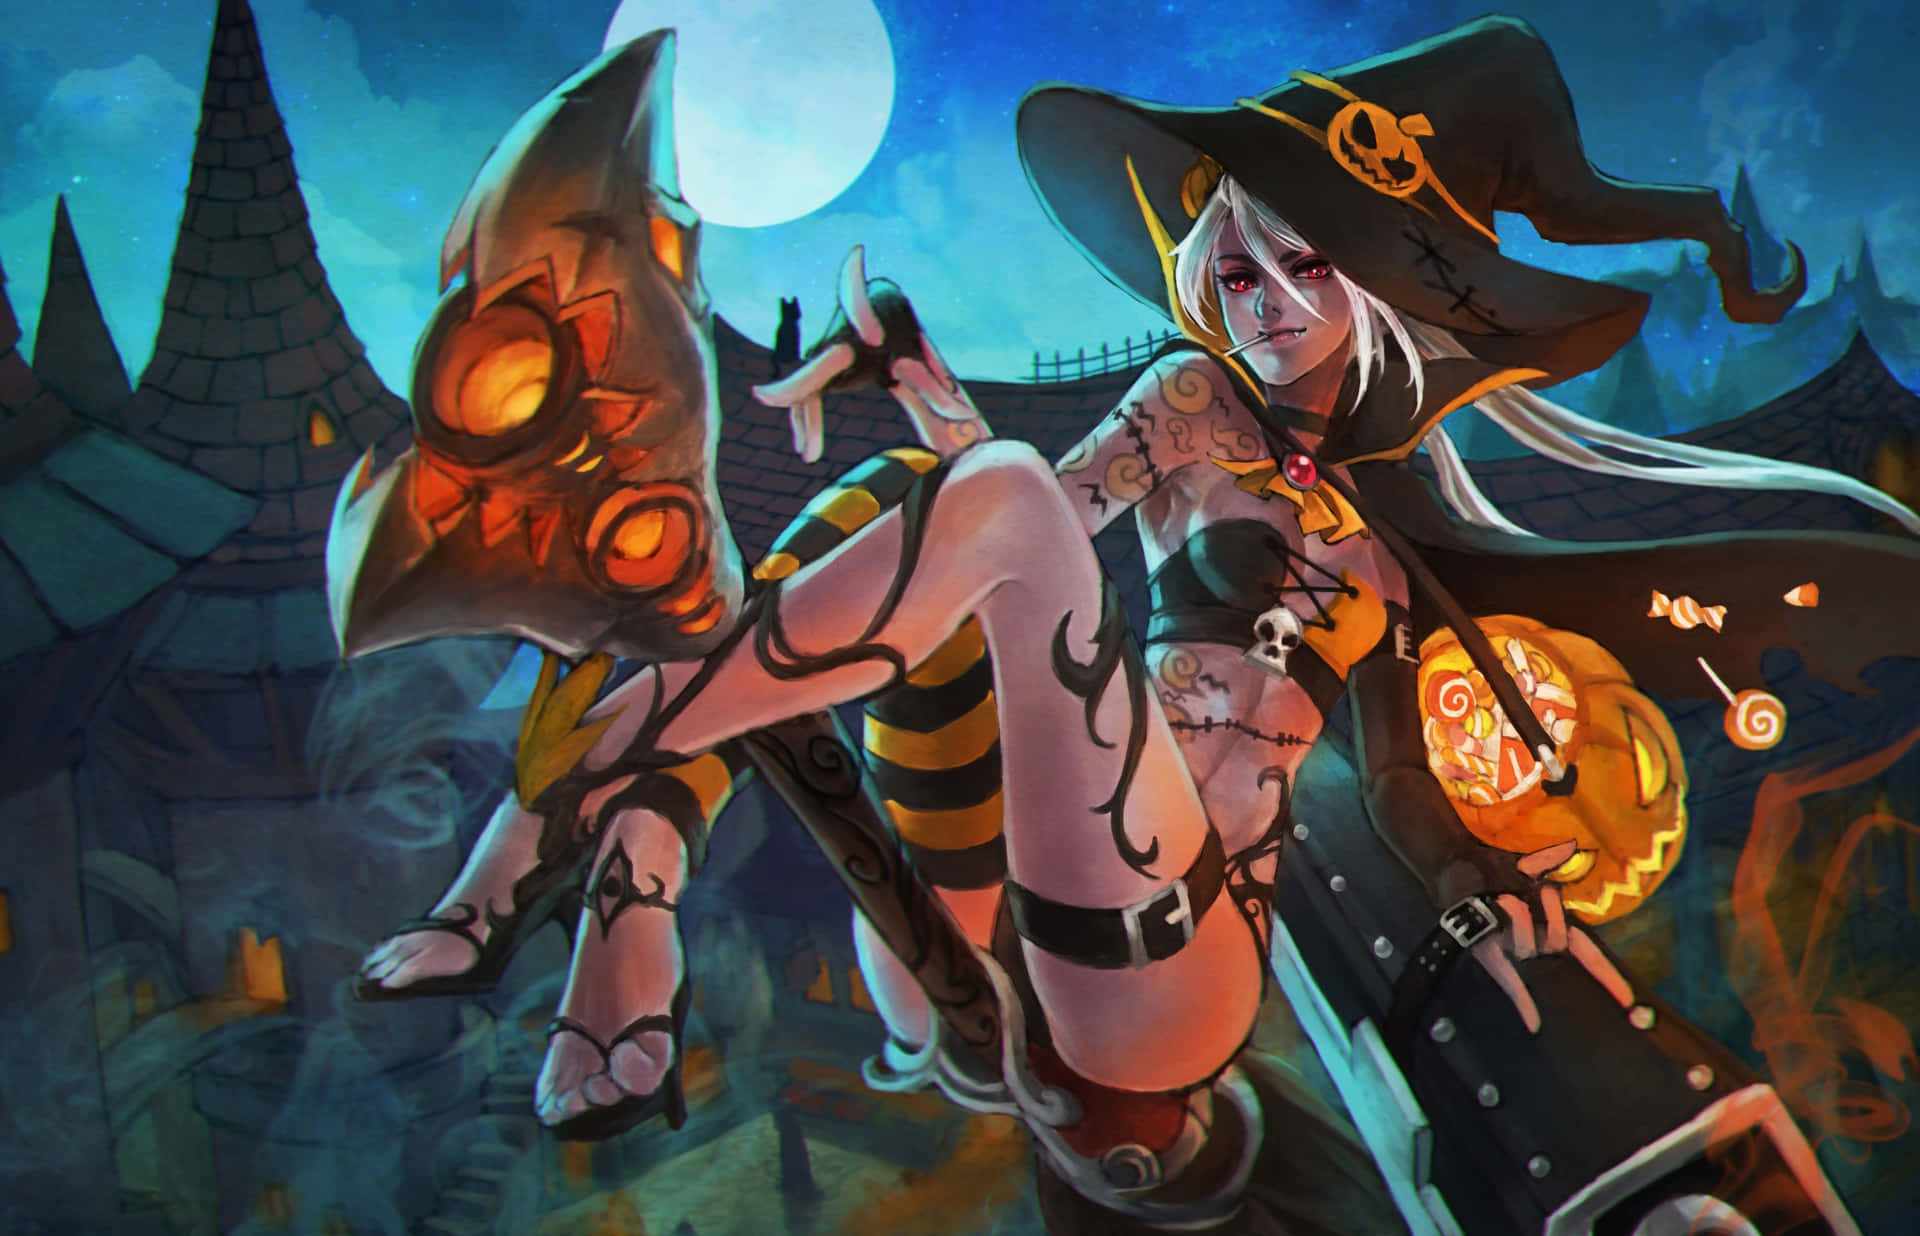 Jinx, the Loose Cannon, unleashes chaos in the world of League of Legends